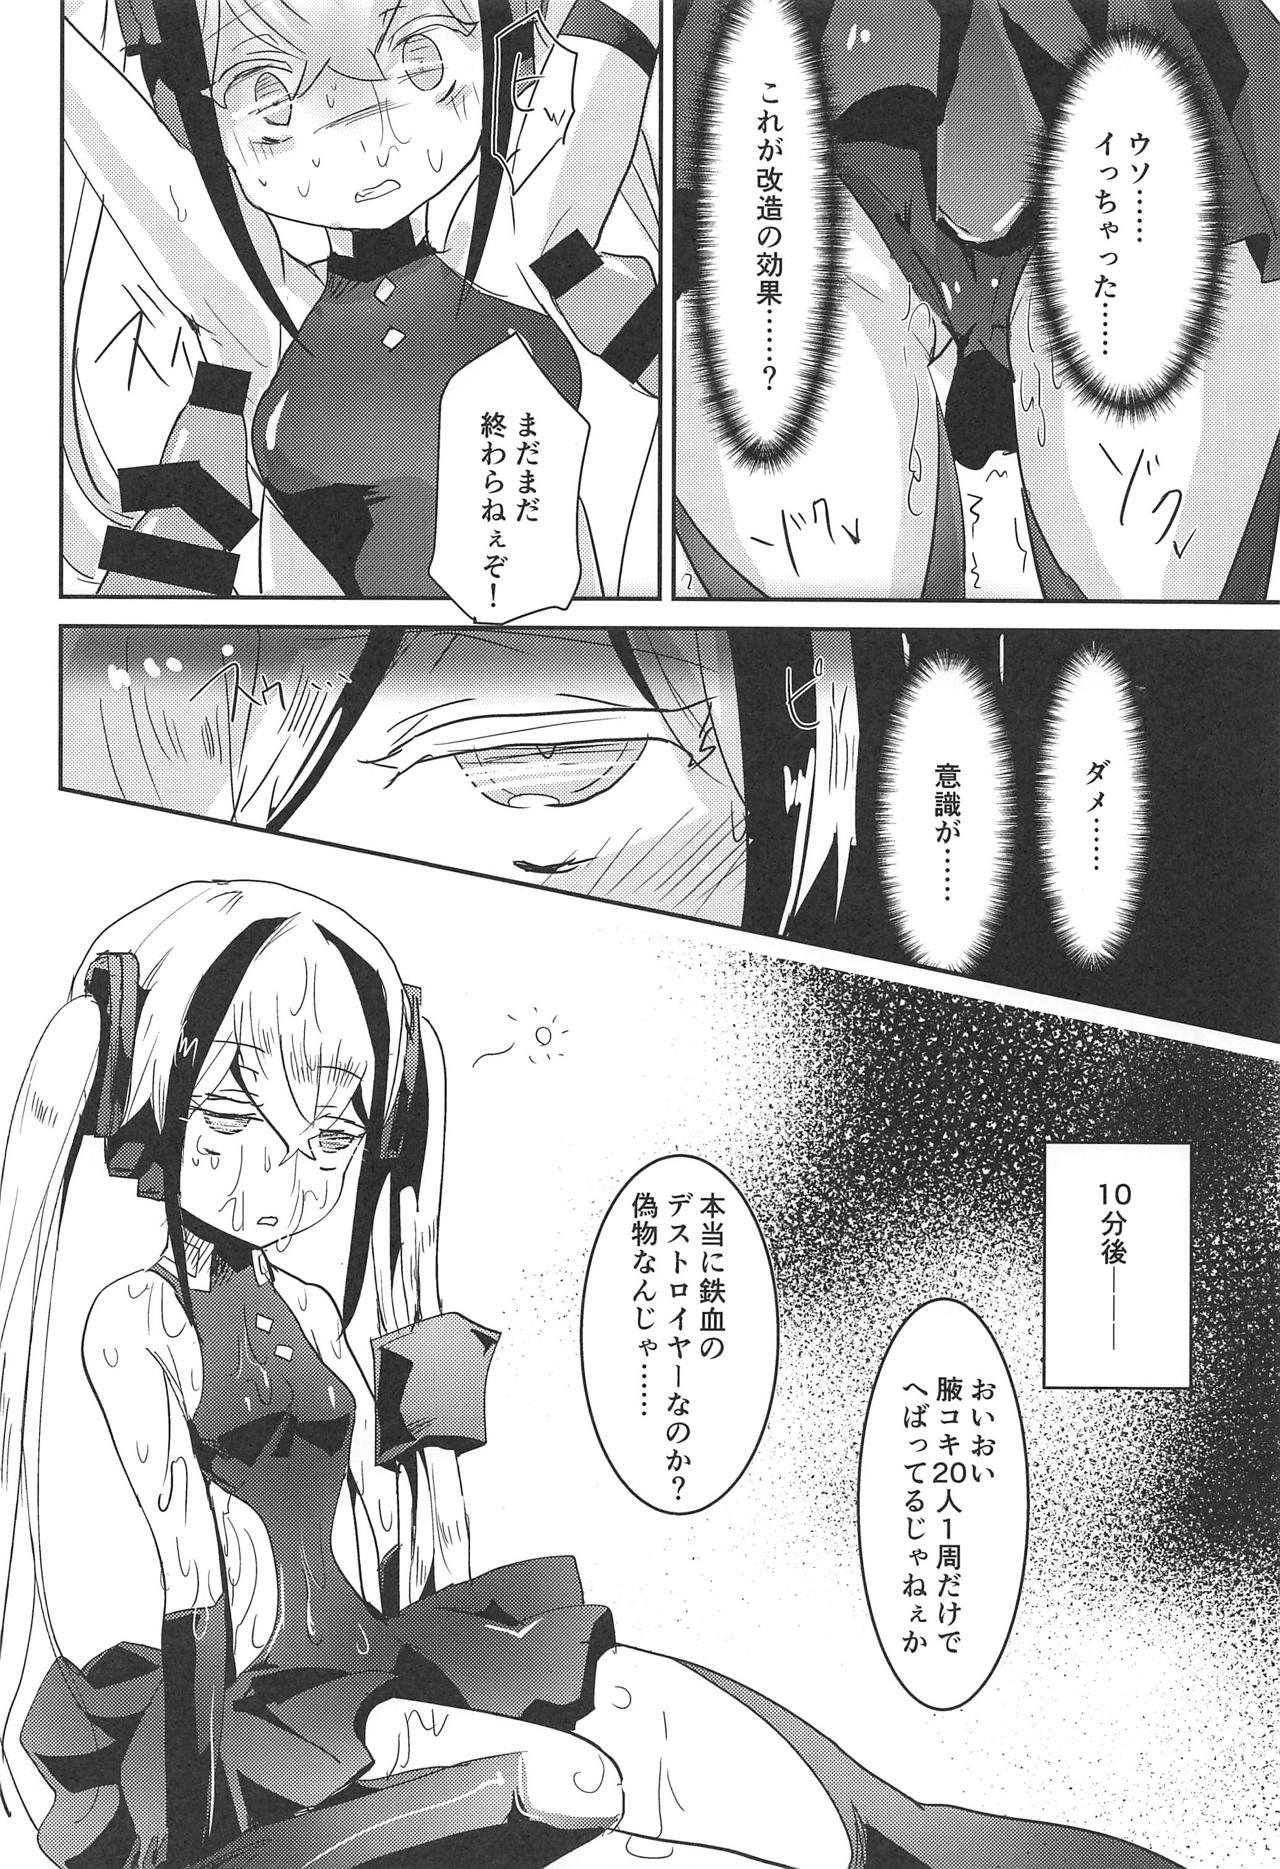 Self Miserable Dolls - Girls frontline Group Sex - Page 11